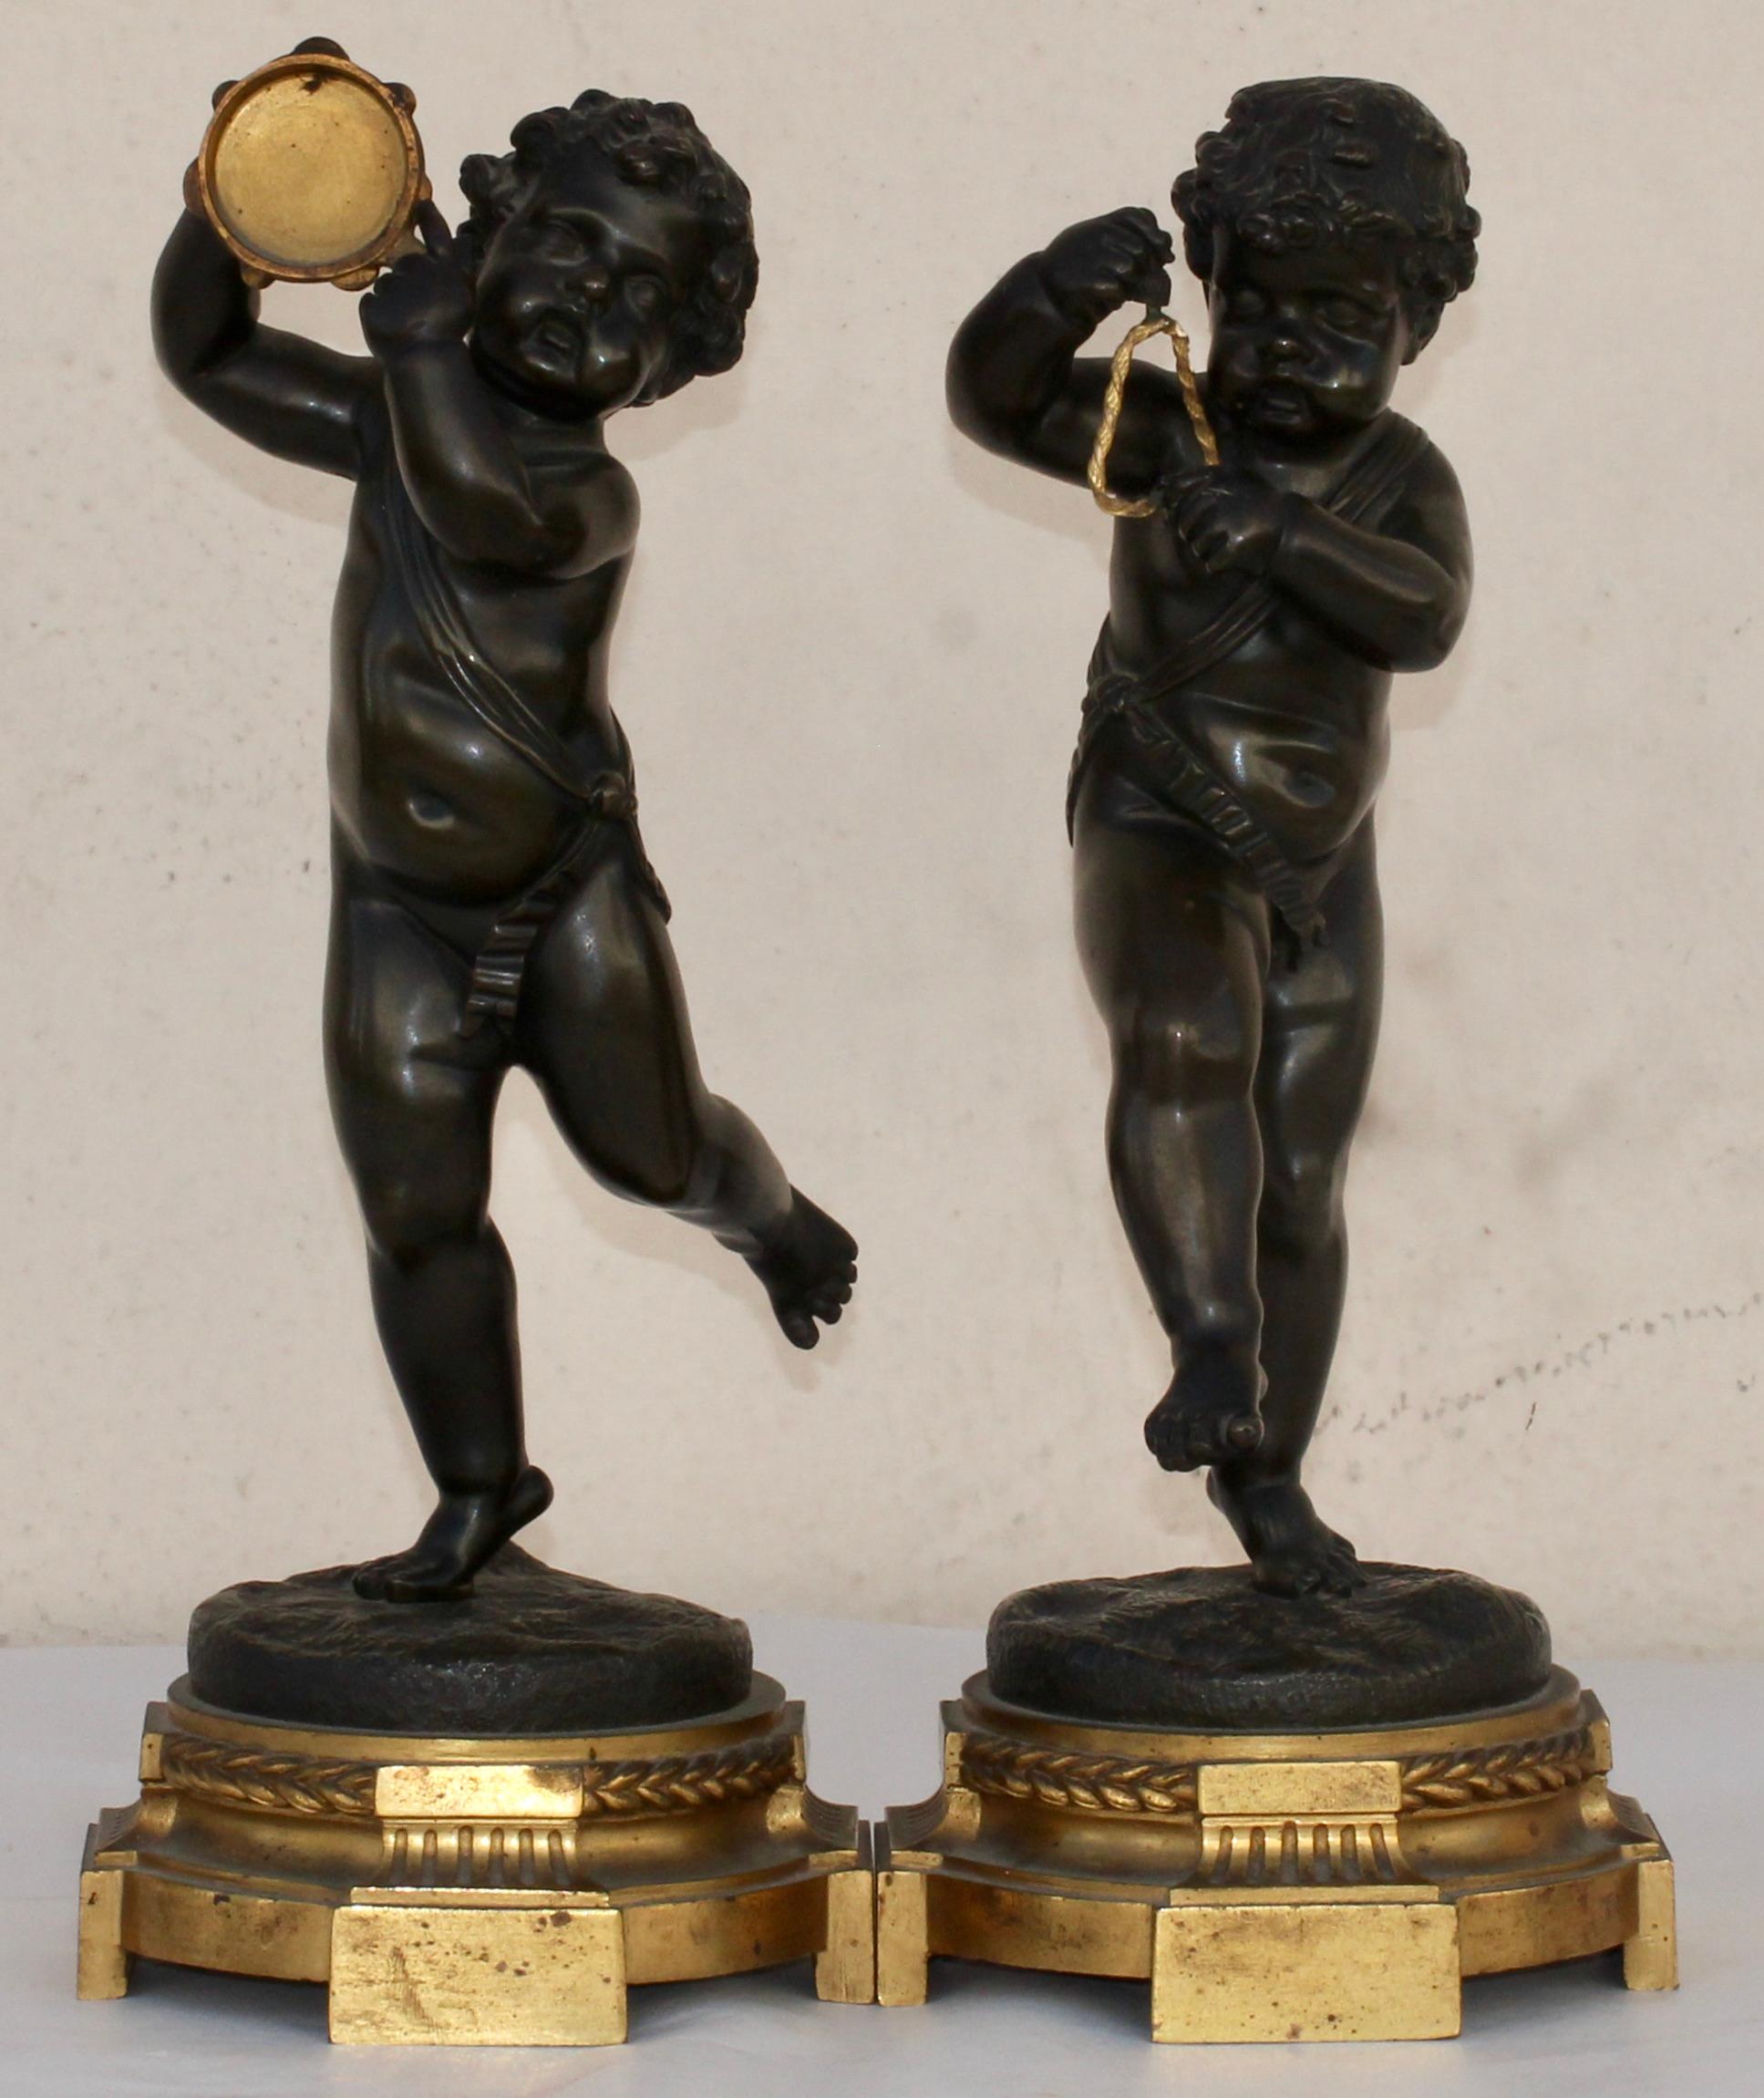 A French 19th century pair of bronze musicians Putti
Patinated bronze on ormolu base
Louis XVI style
circa 1880.